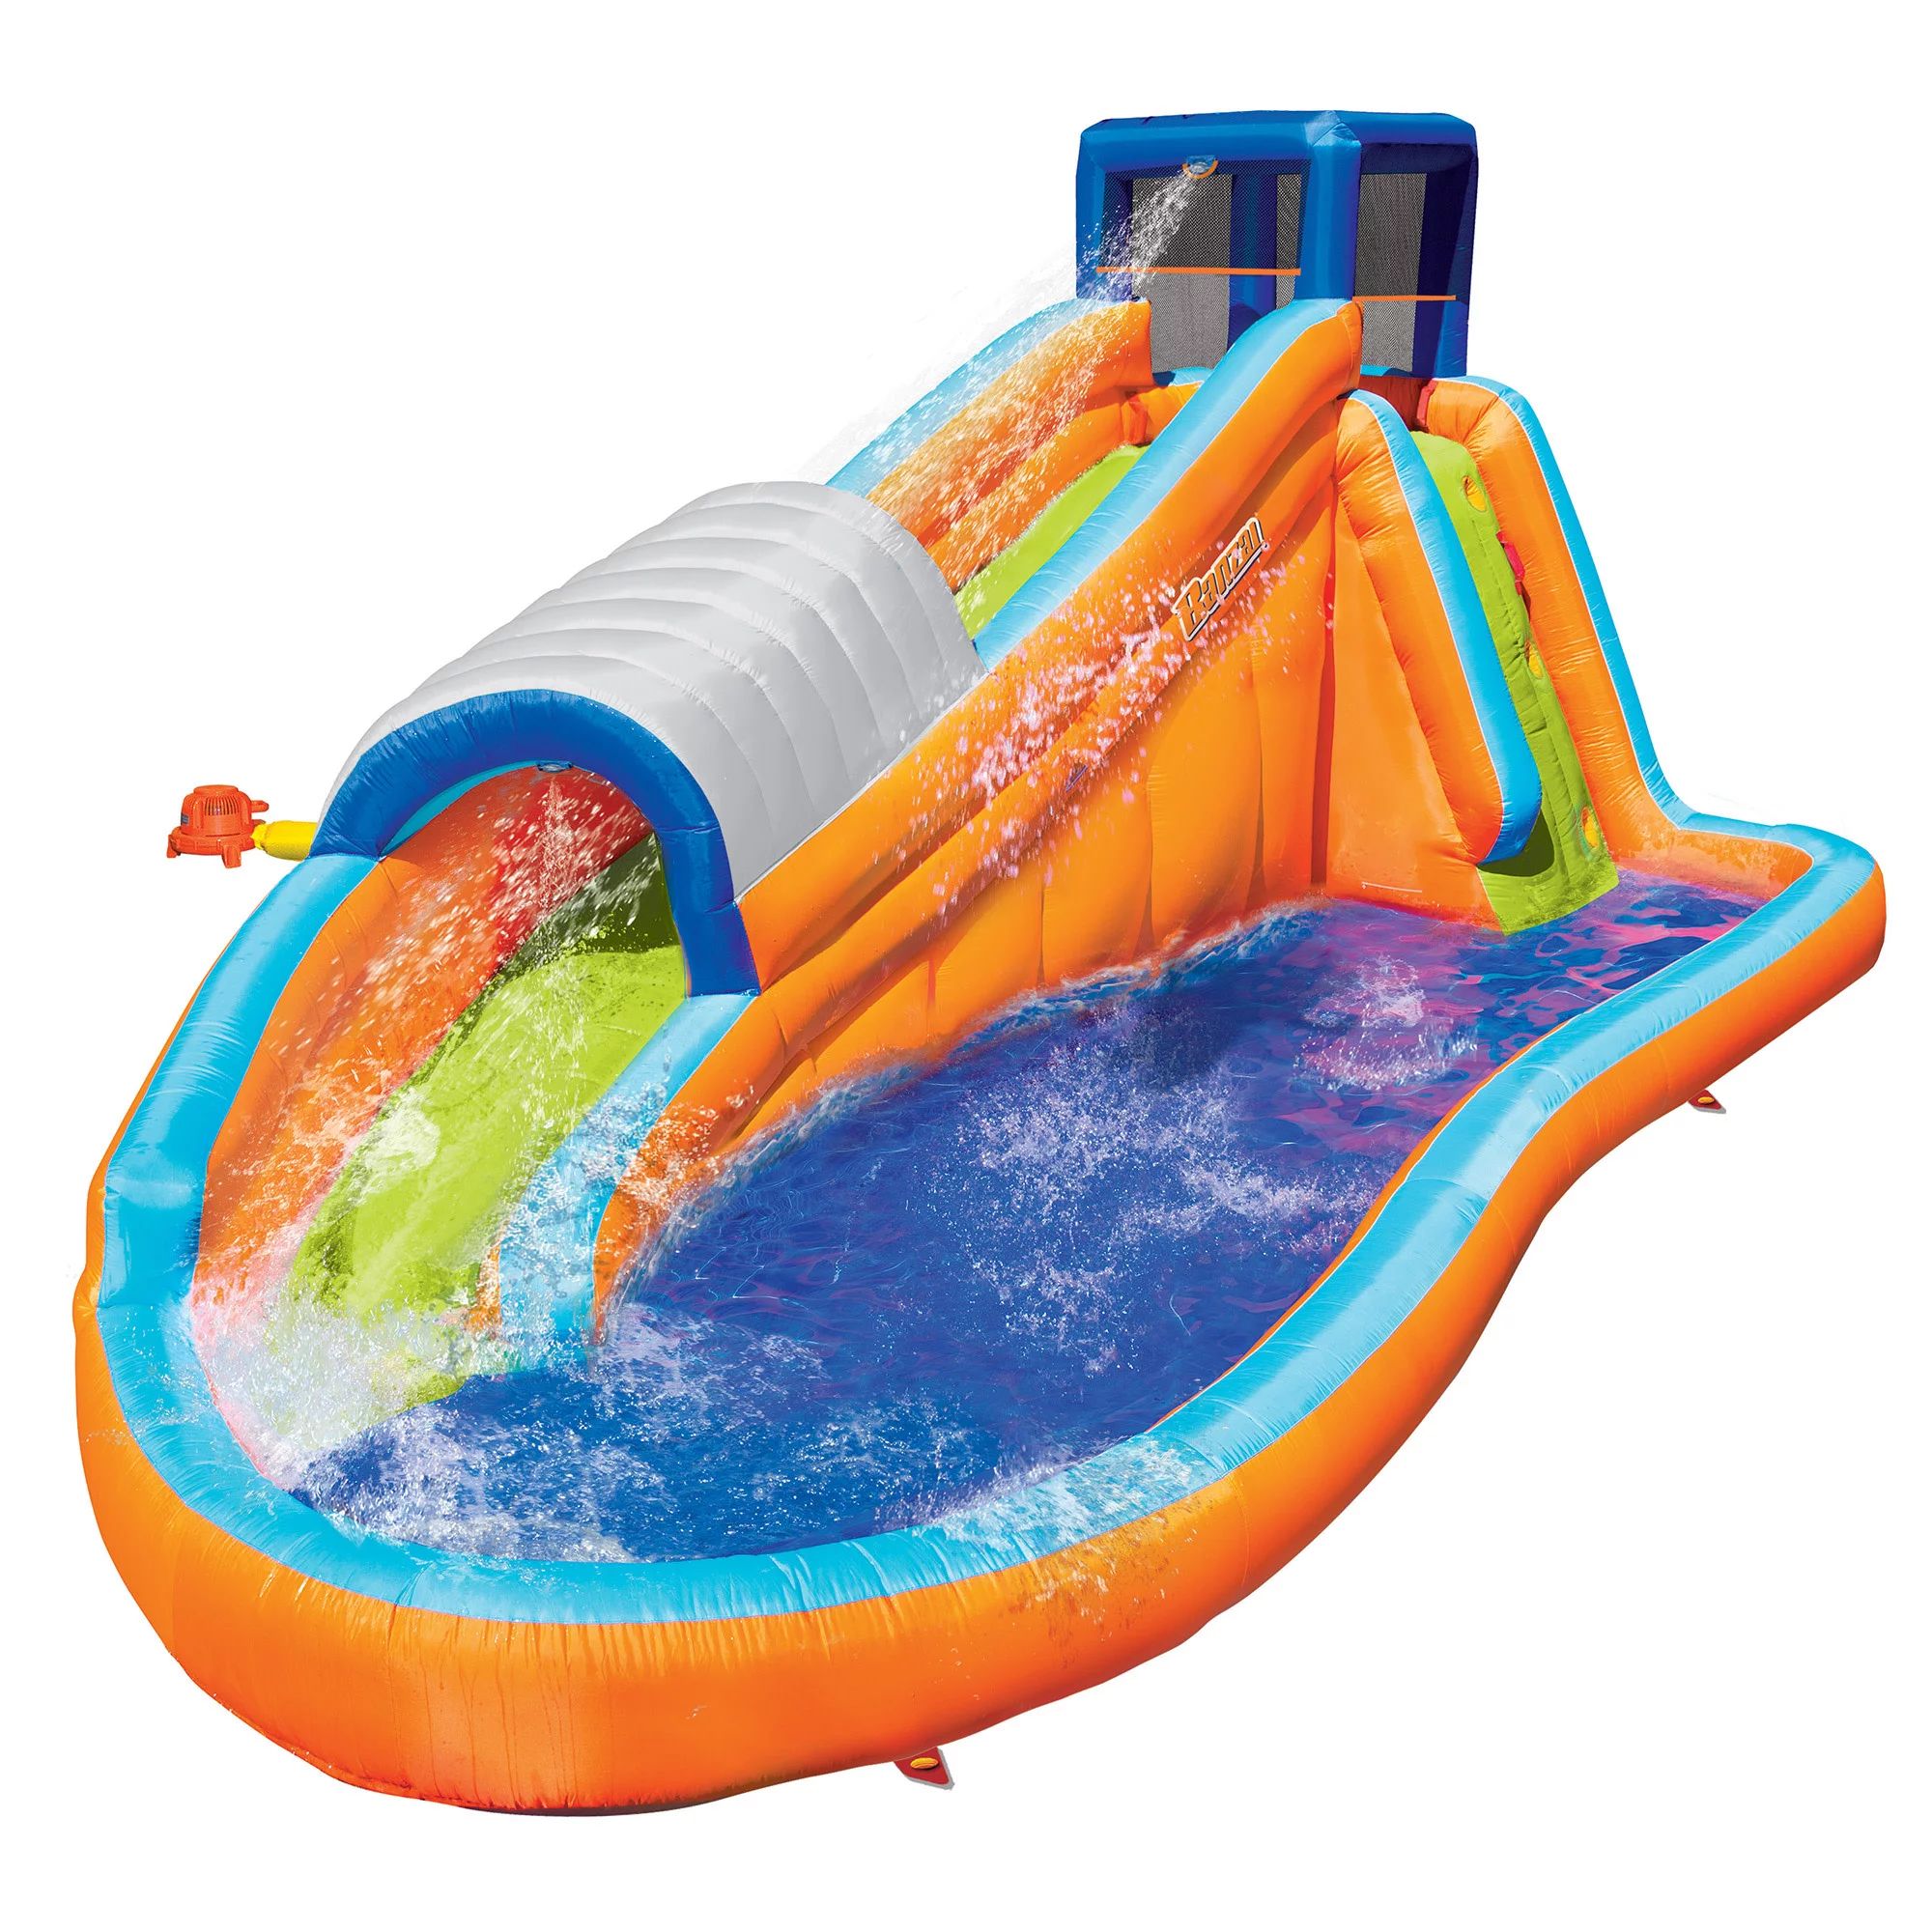 Banzai Surf Rider Water Park, Length: 17 ft 7 in, Width: 9 ft 6 in, Height: 7 ft 11 in, Inflatabl... | Walmart (US)